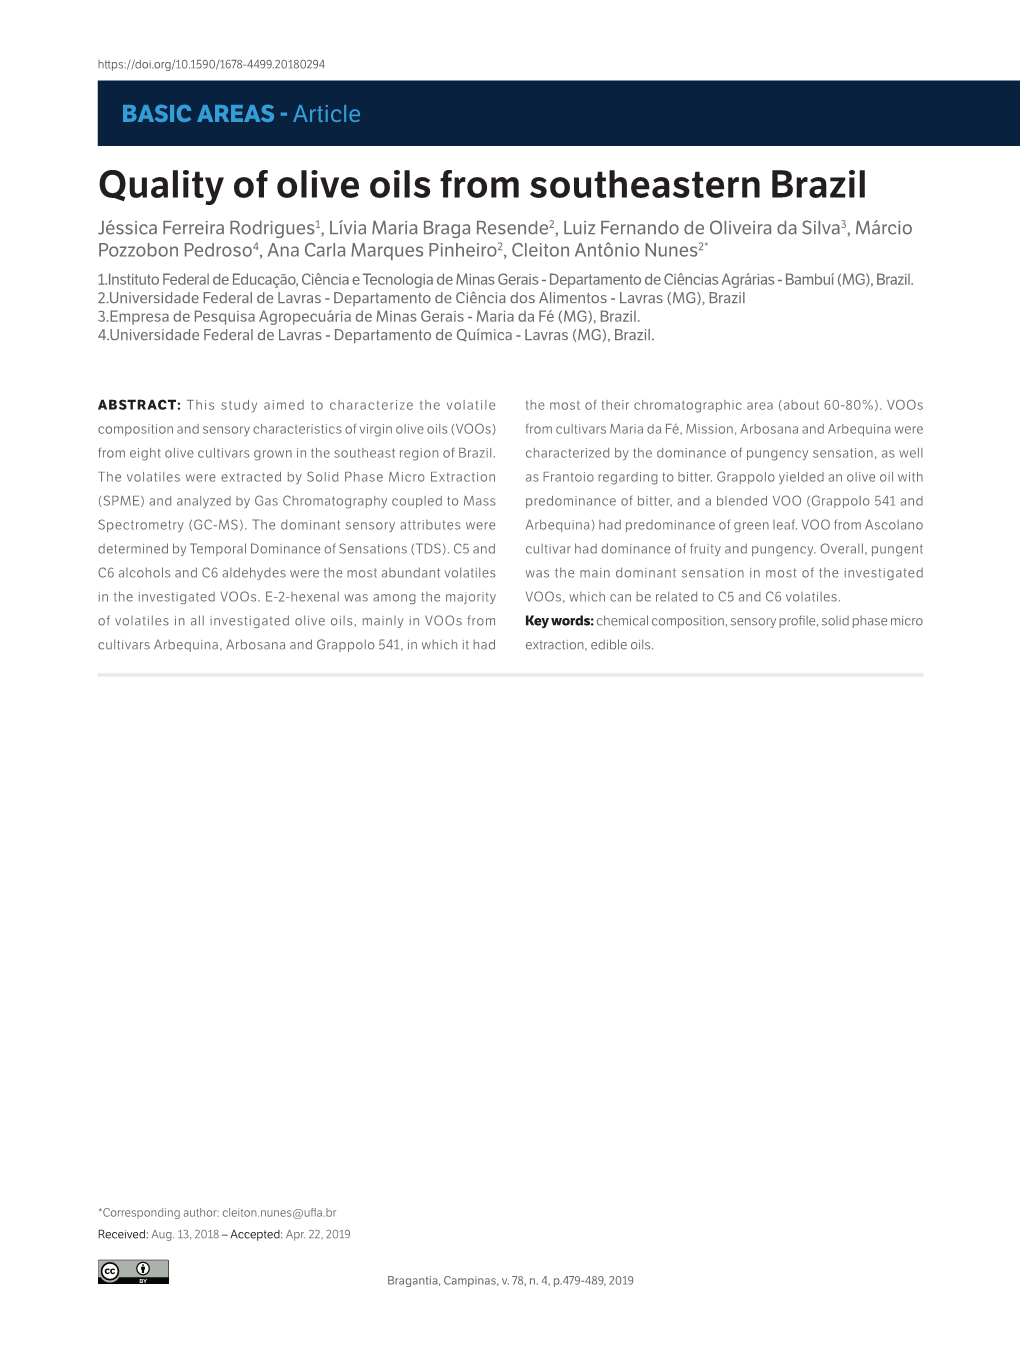 Quality of Olive Oils from Southeastern Brazil